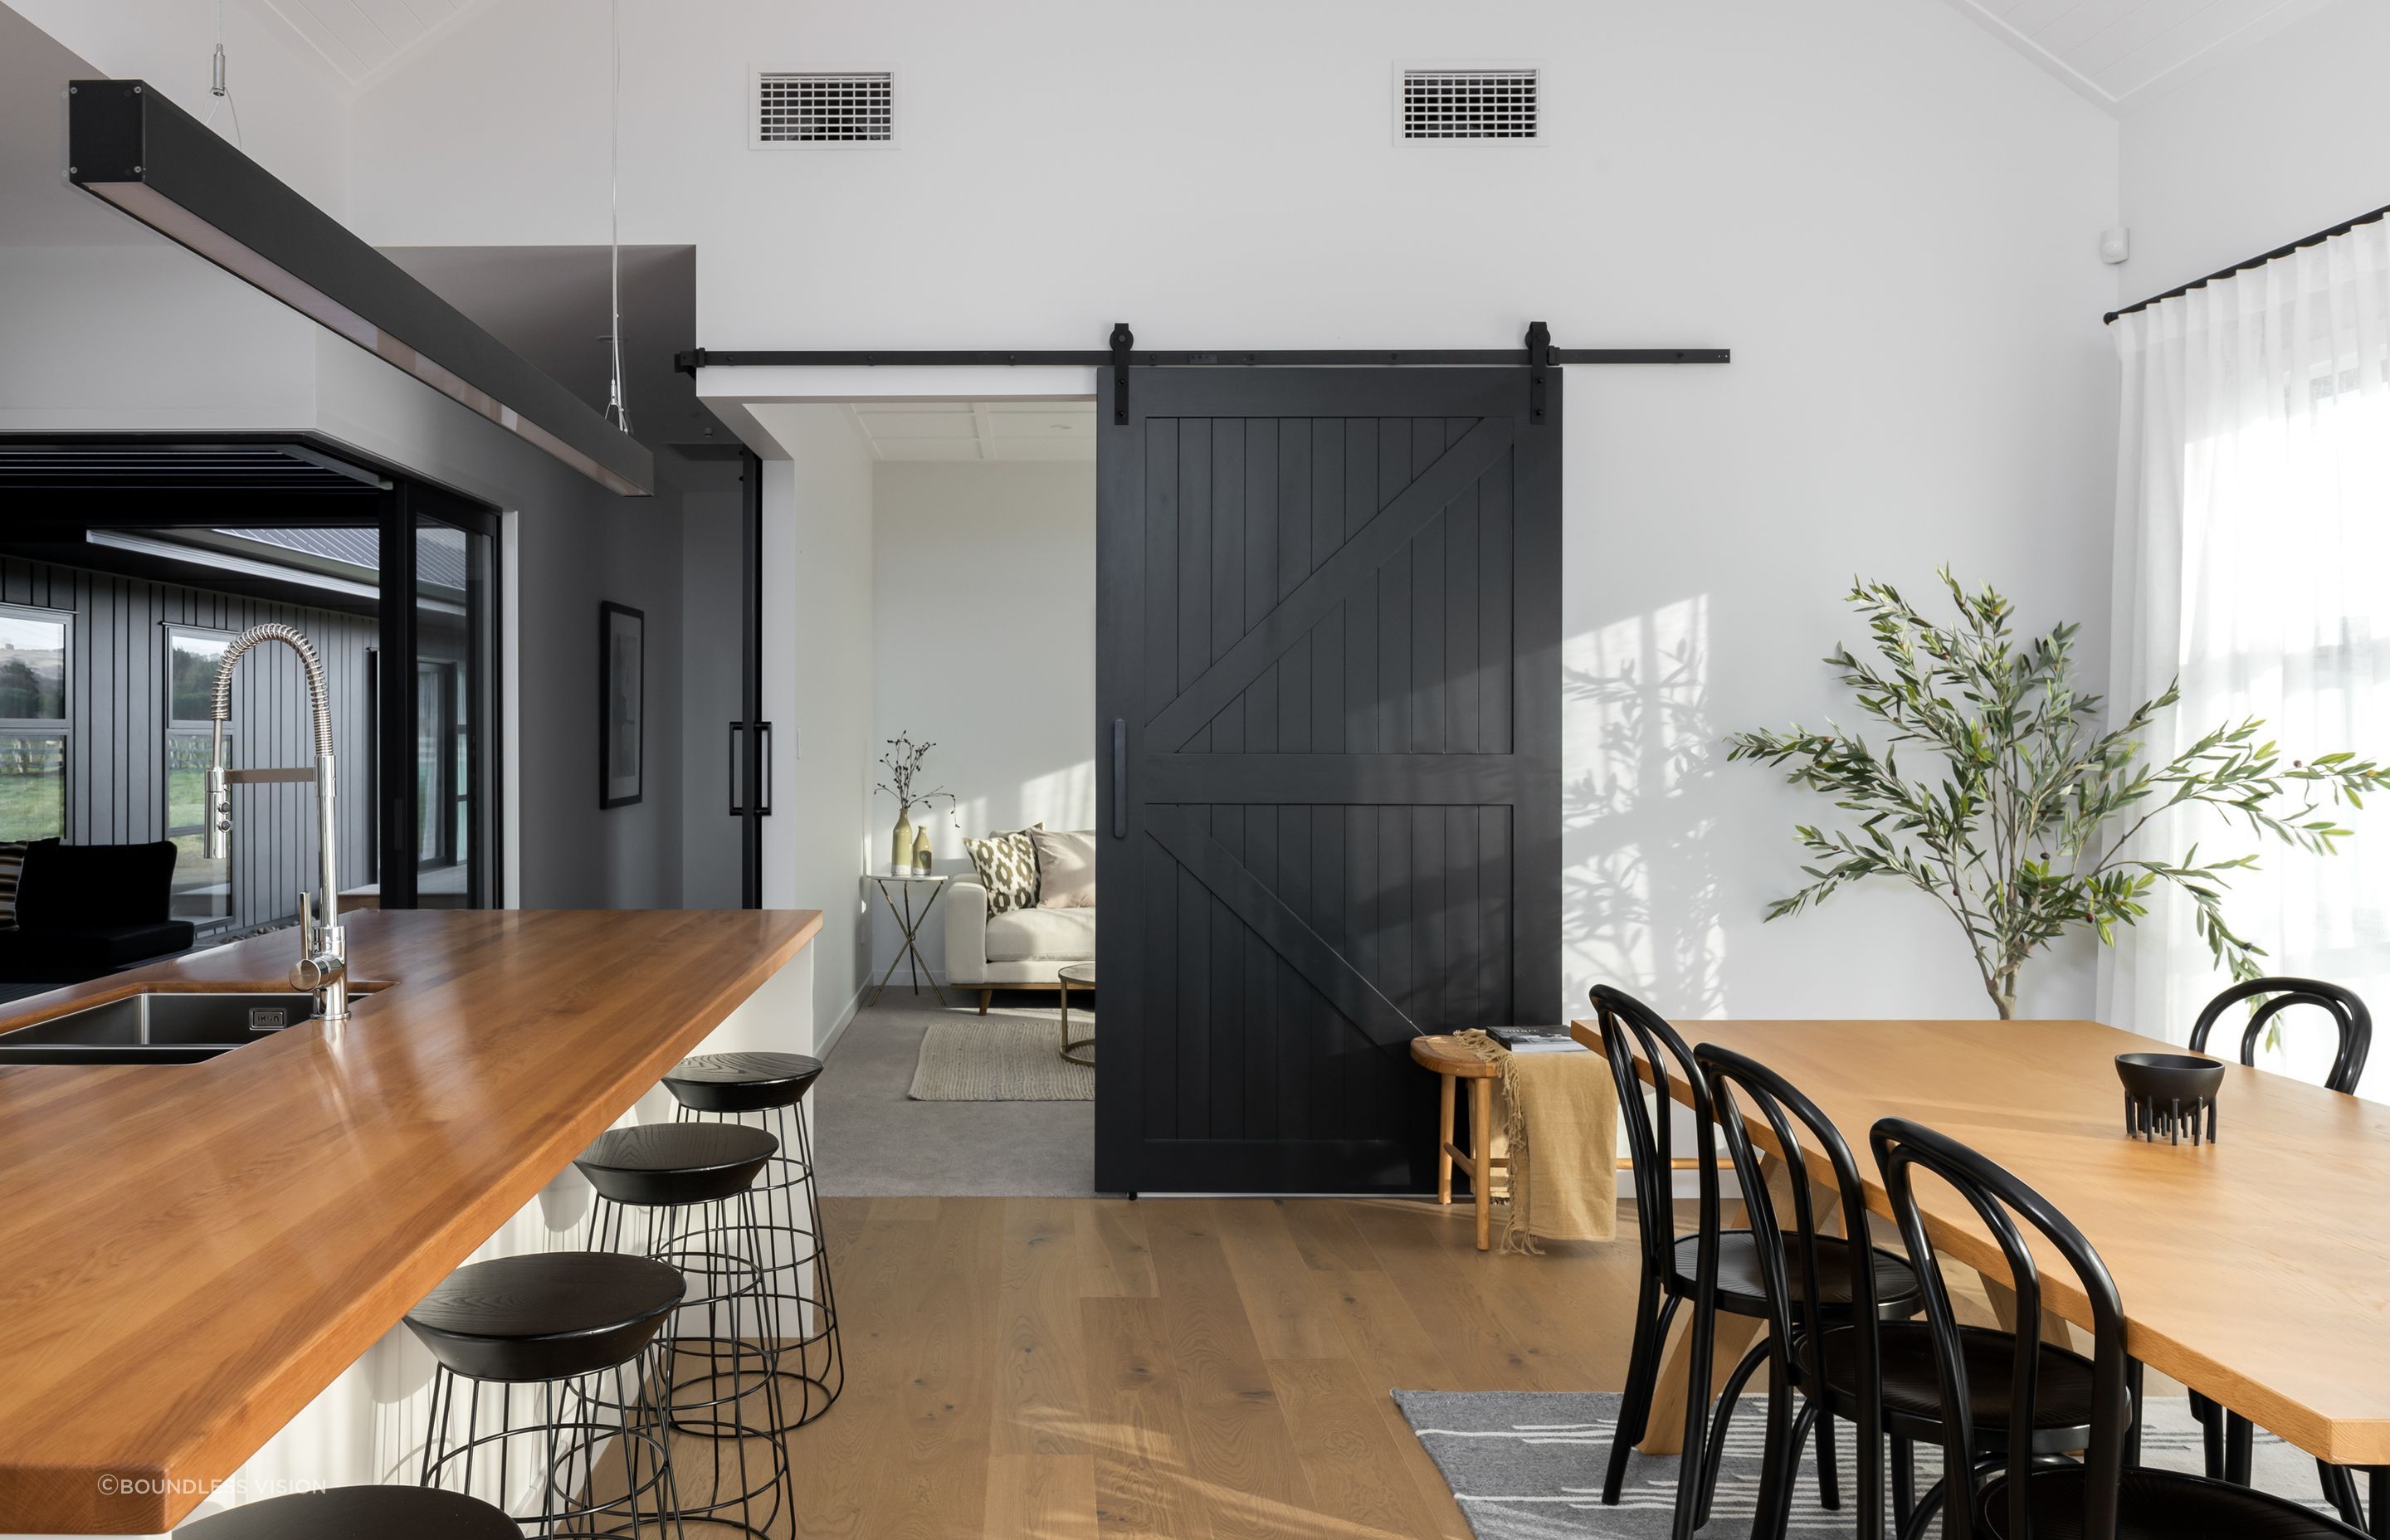 Cleverly placed barn-style doors separate or connect spaces on demand. 